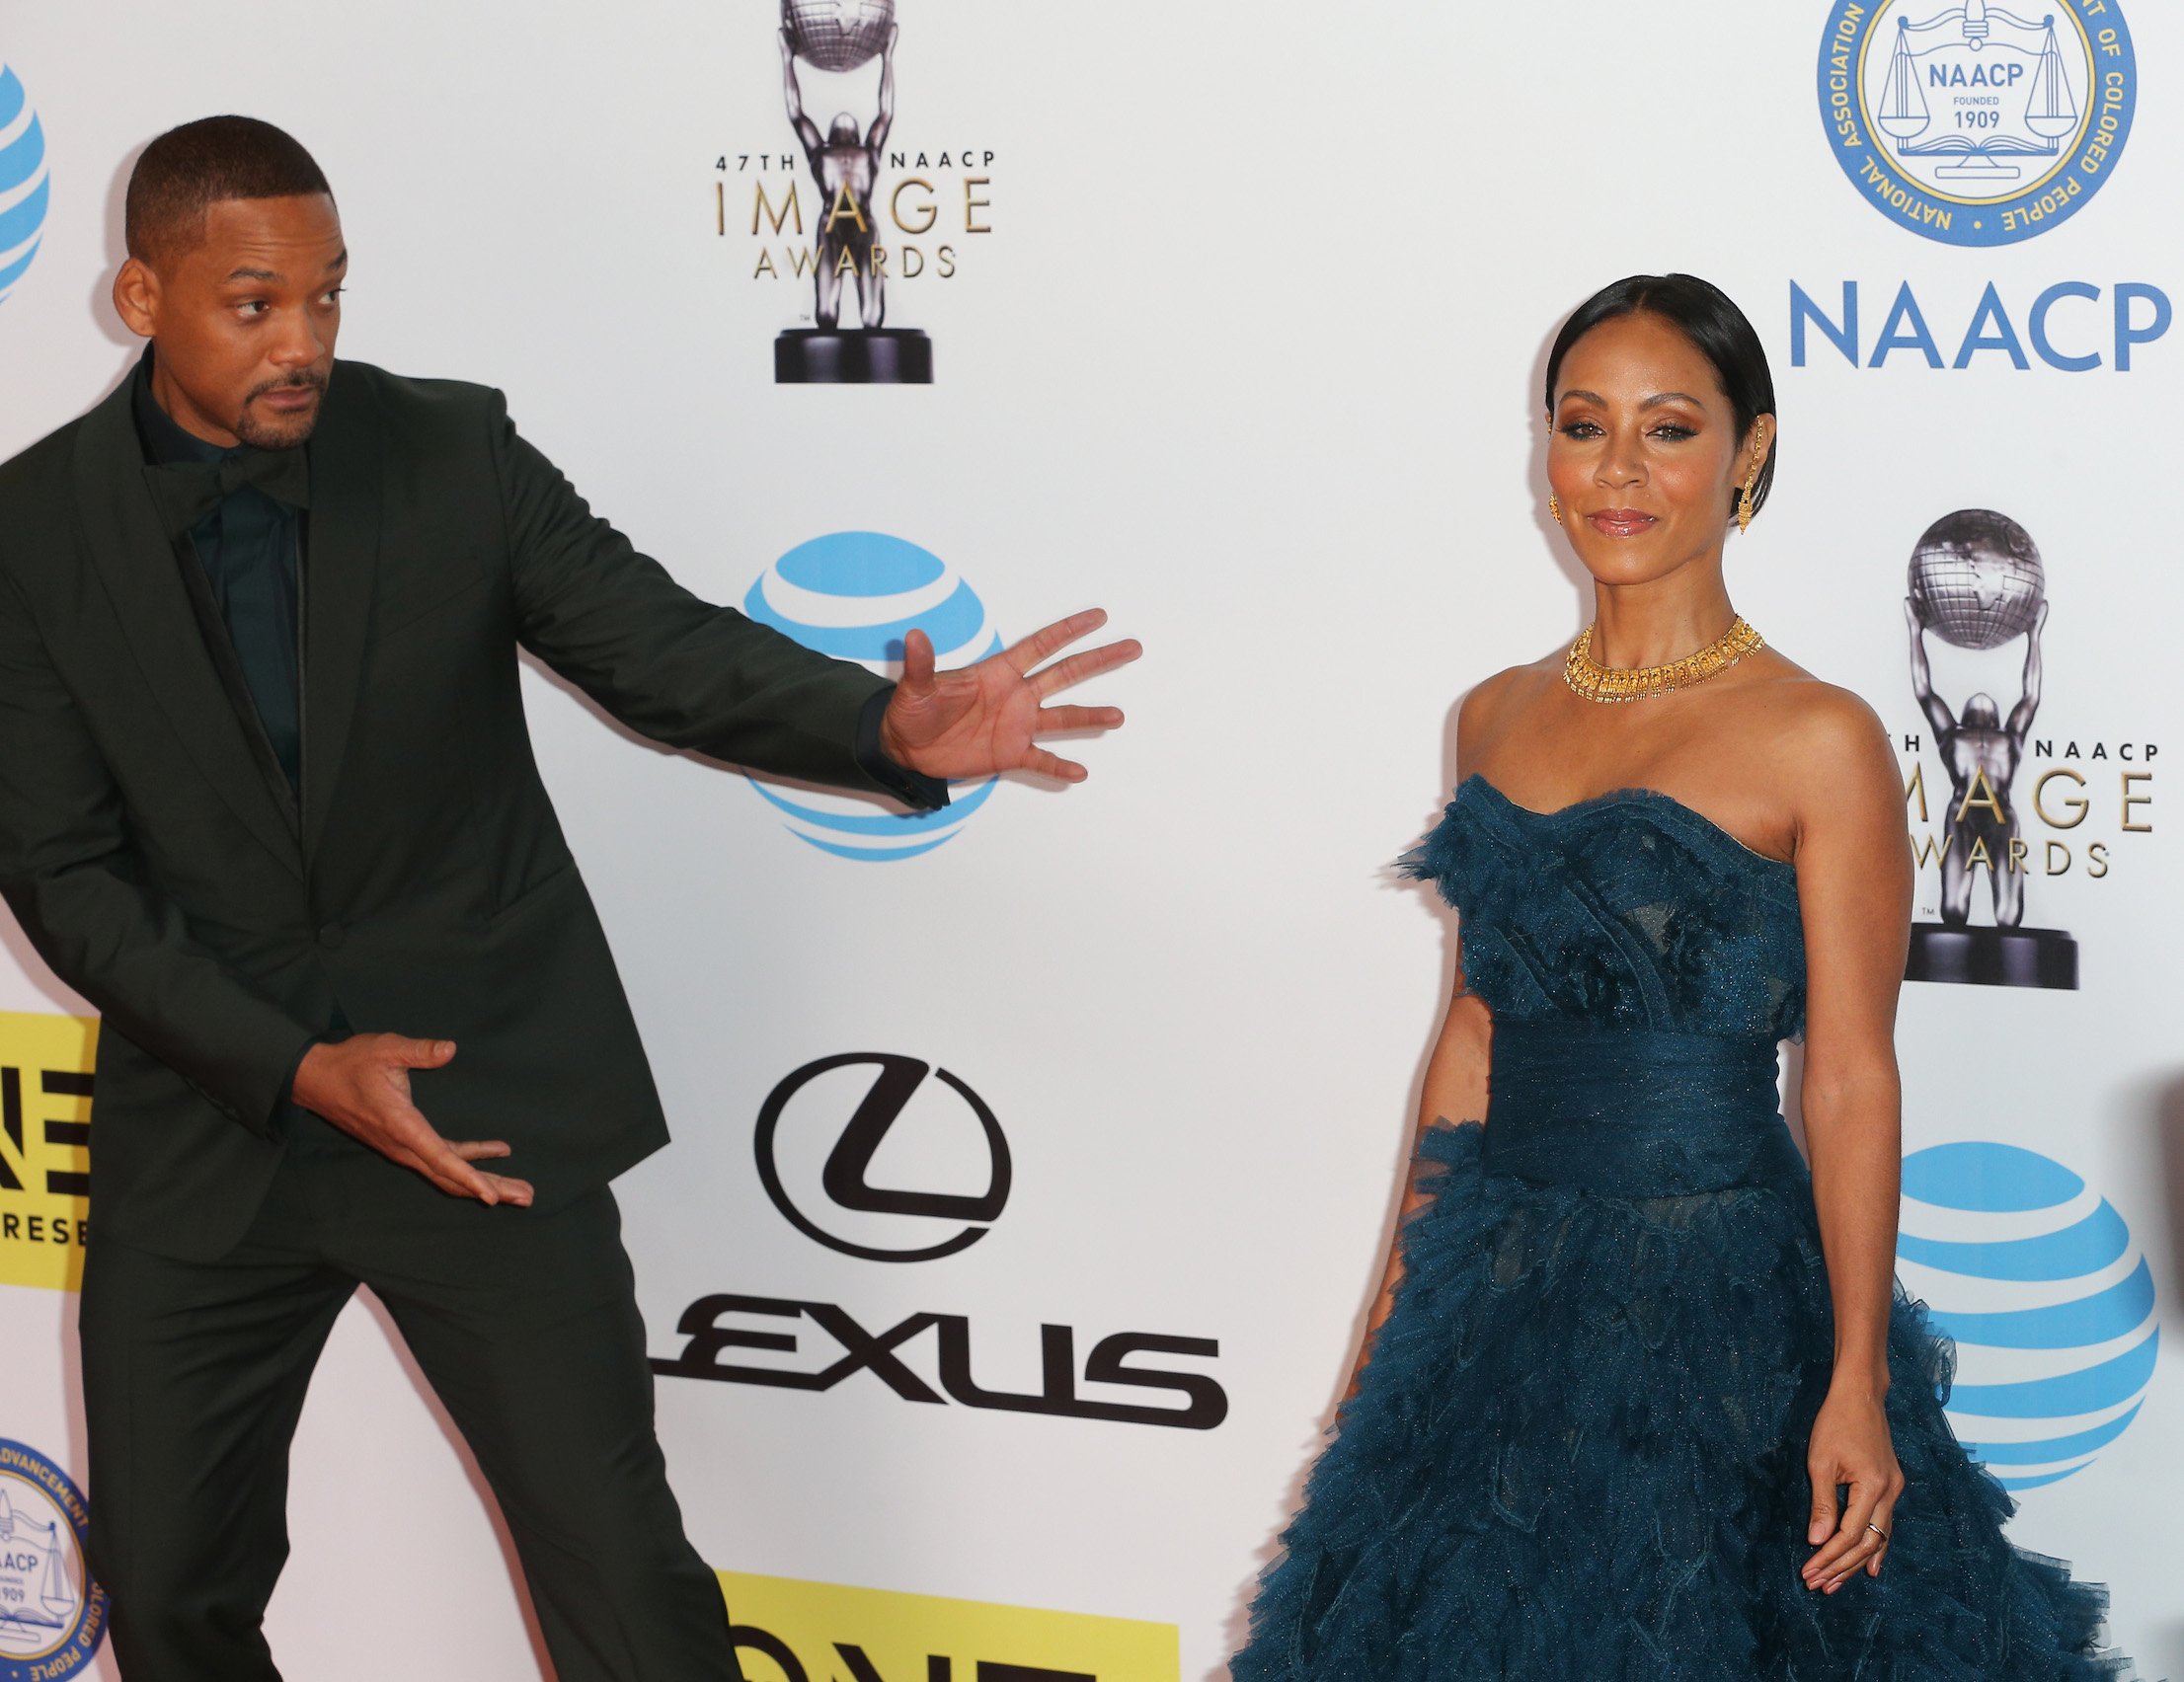 Will Smith (L) and Jada Pinkett Smith attend the 47th NAACP Image Awards